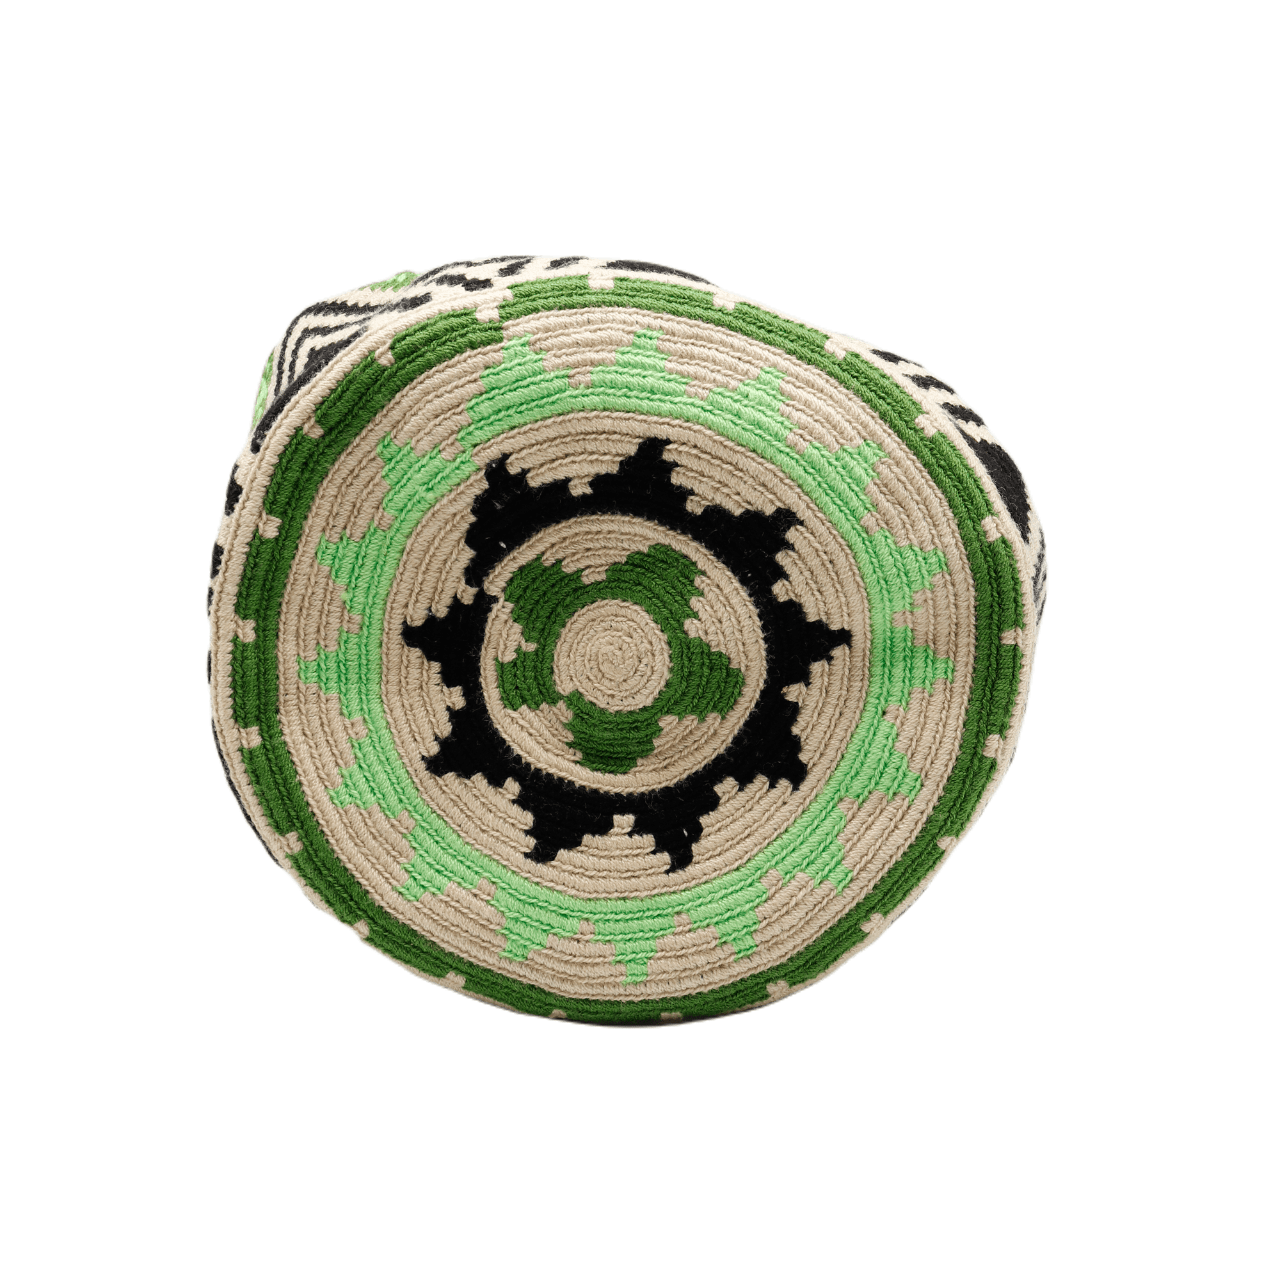 Alex Wayuu Bag in stunning green, beige, and black tones, handcrafted in Colombia, showcasing an exceptional and one-of-a-kind design.